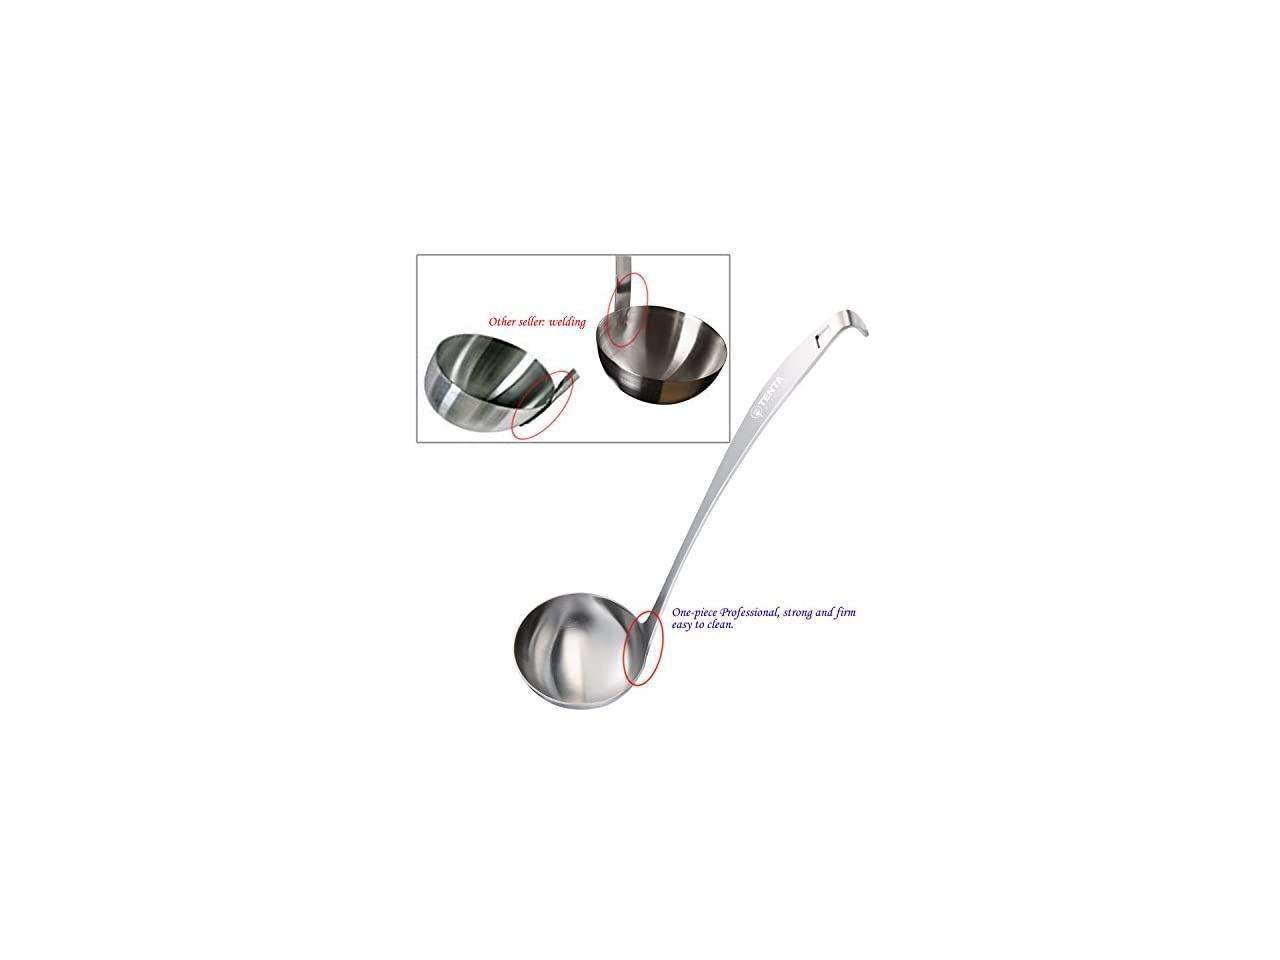 TENTA KITCHEN Professional Large Stainless Steel Serving Ladle Spoon Gravy Ladle Soup Spoon For School Canteen,Hotel Kitchen,Restaurant 3.86x17 